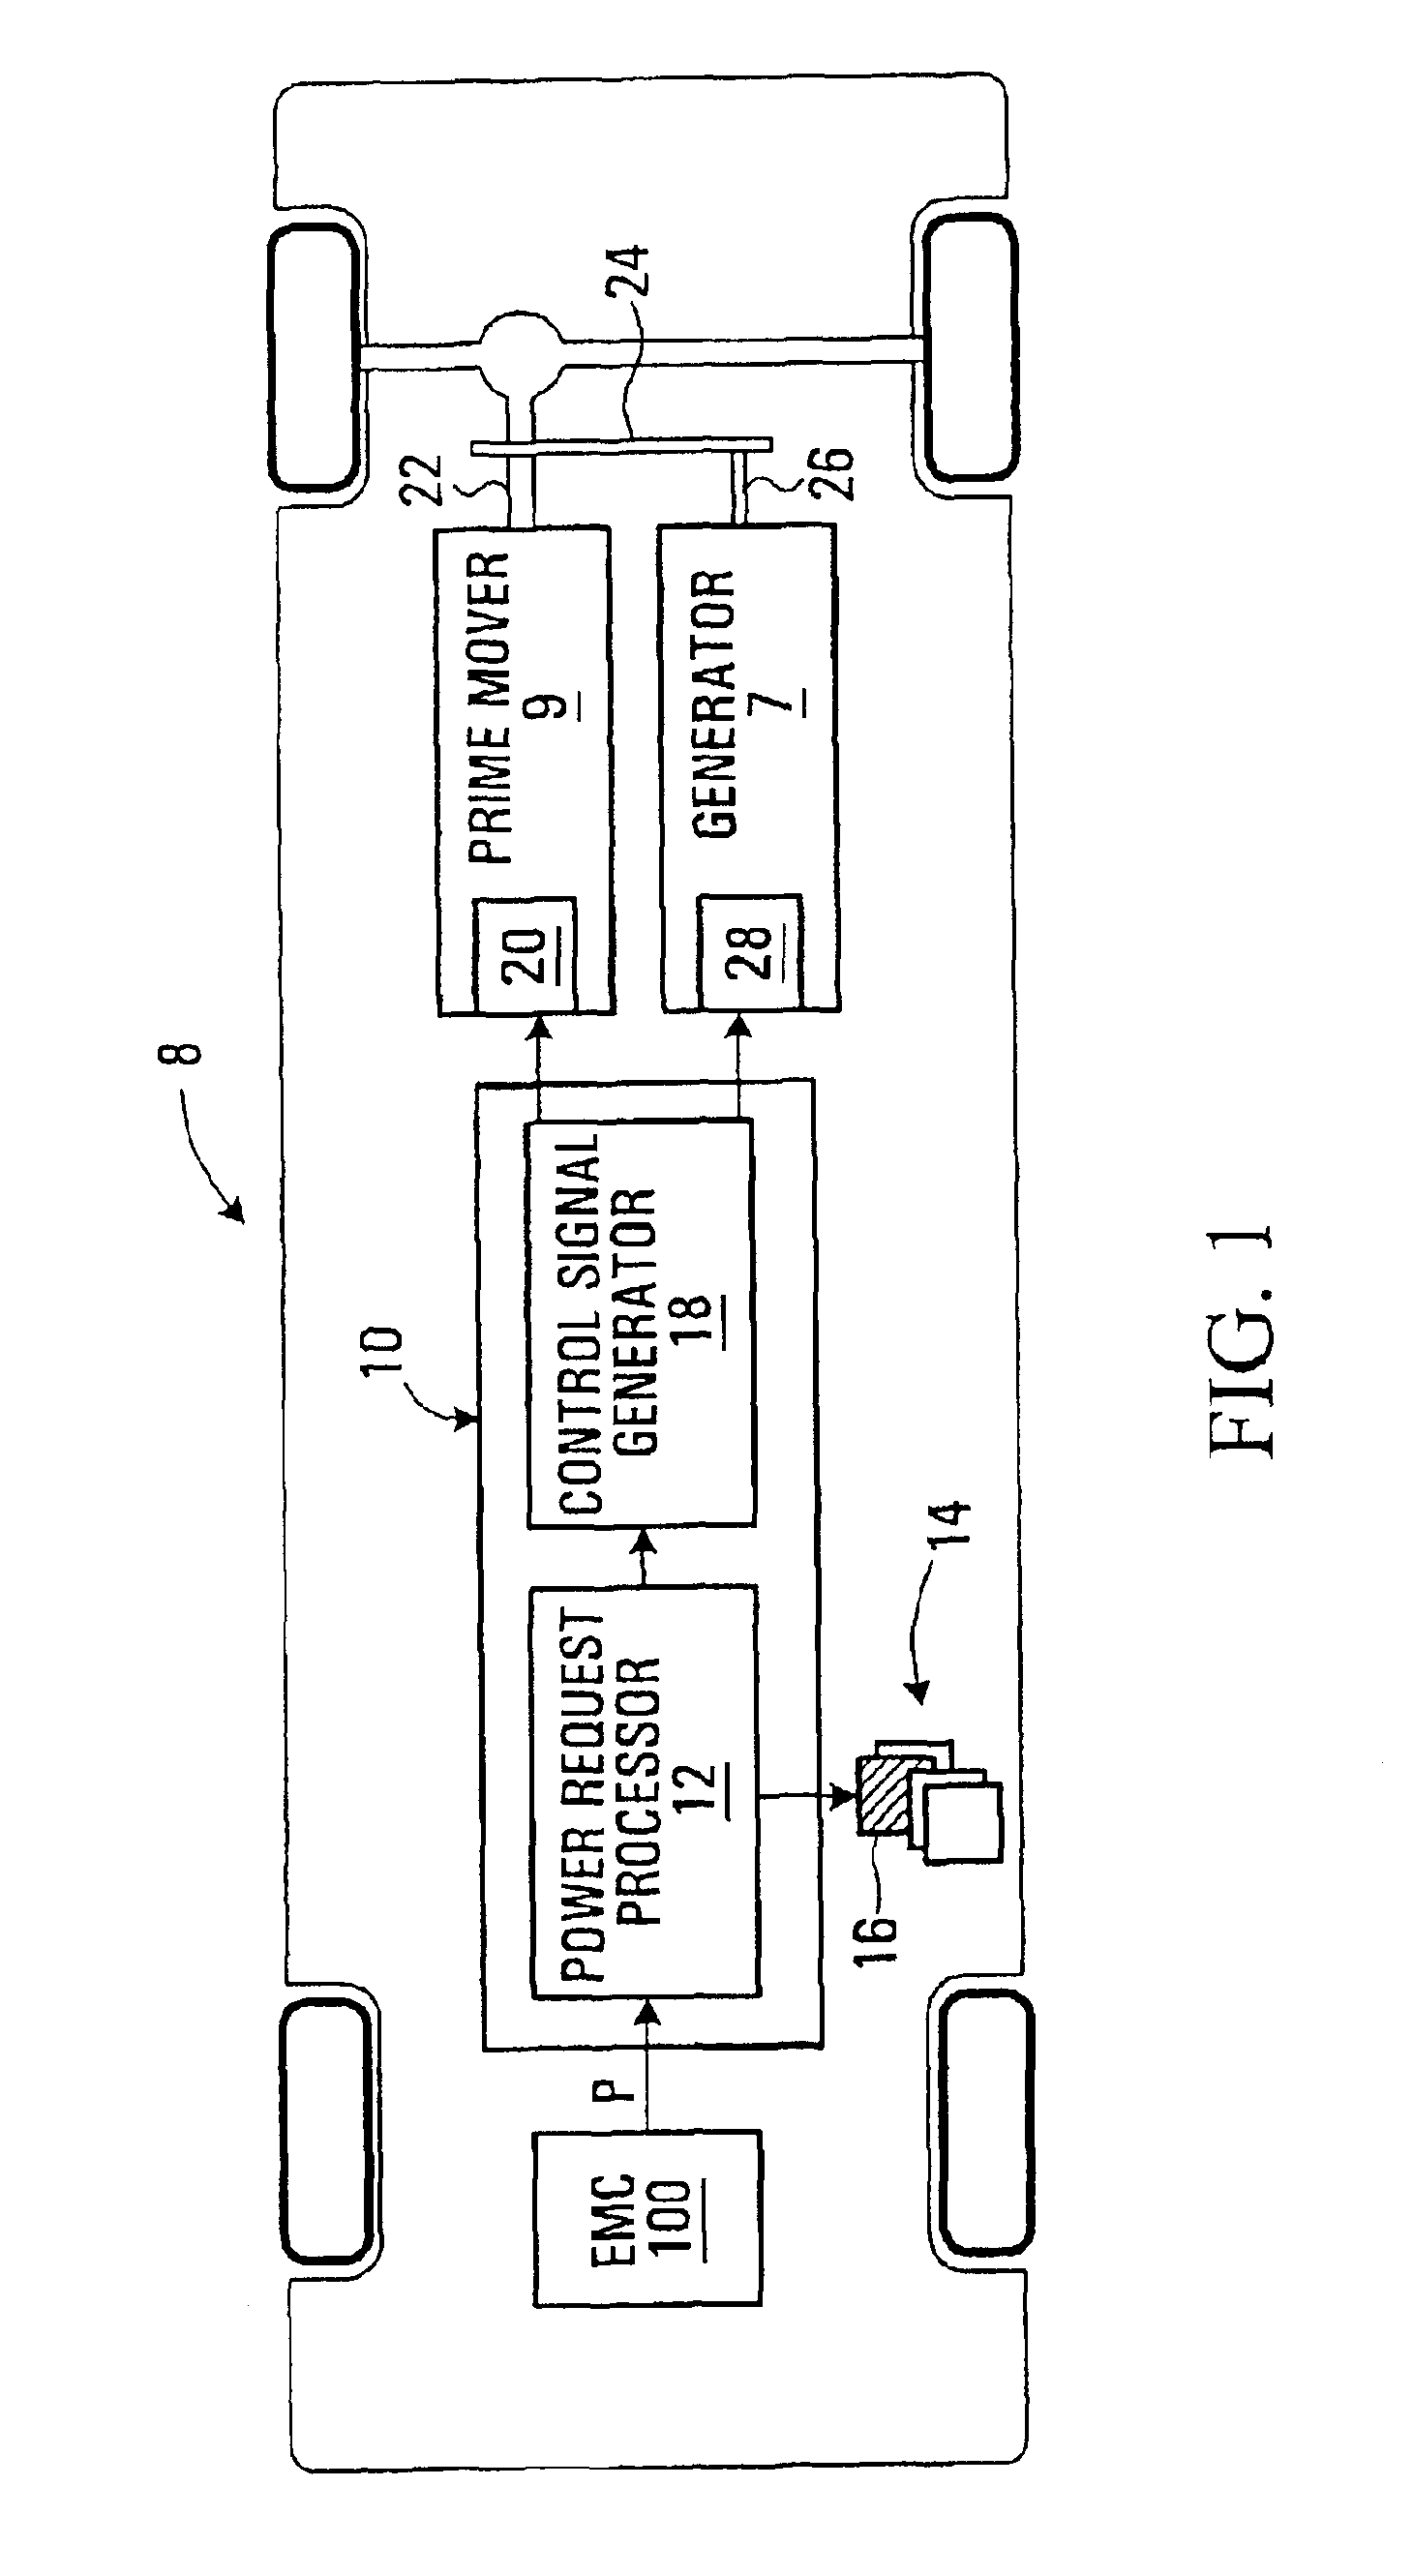 Process, apparatus, media and signals for controlling operating conditions of a hybrid electric vehicle to optimize operating characteristics of the vehicle